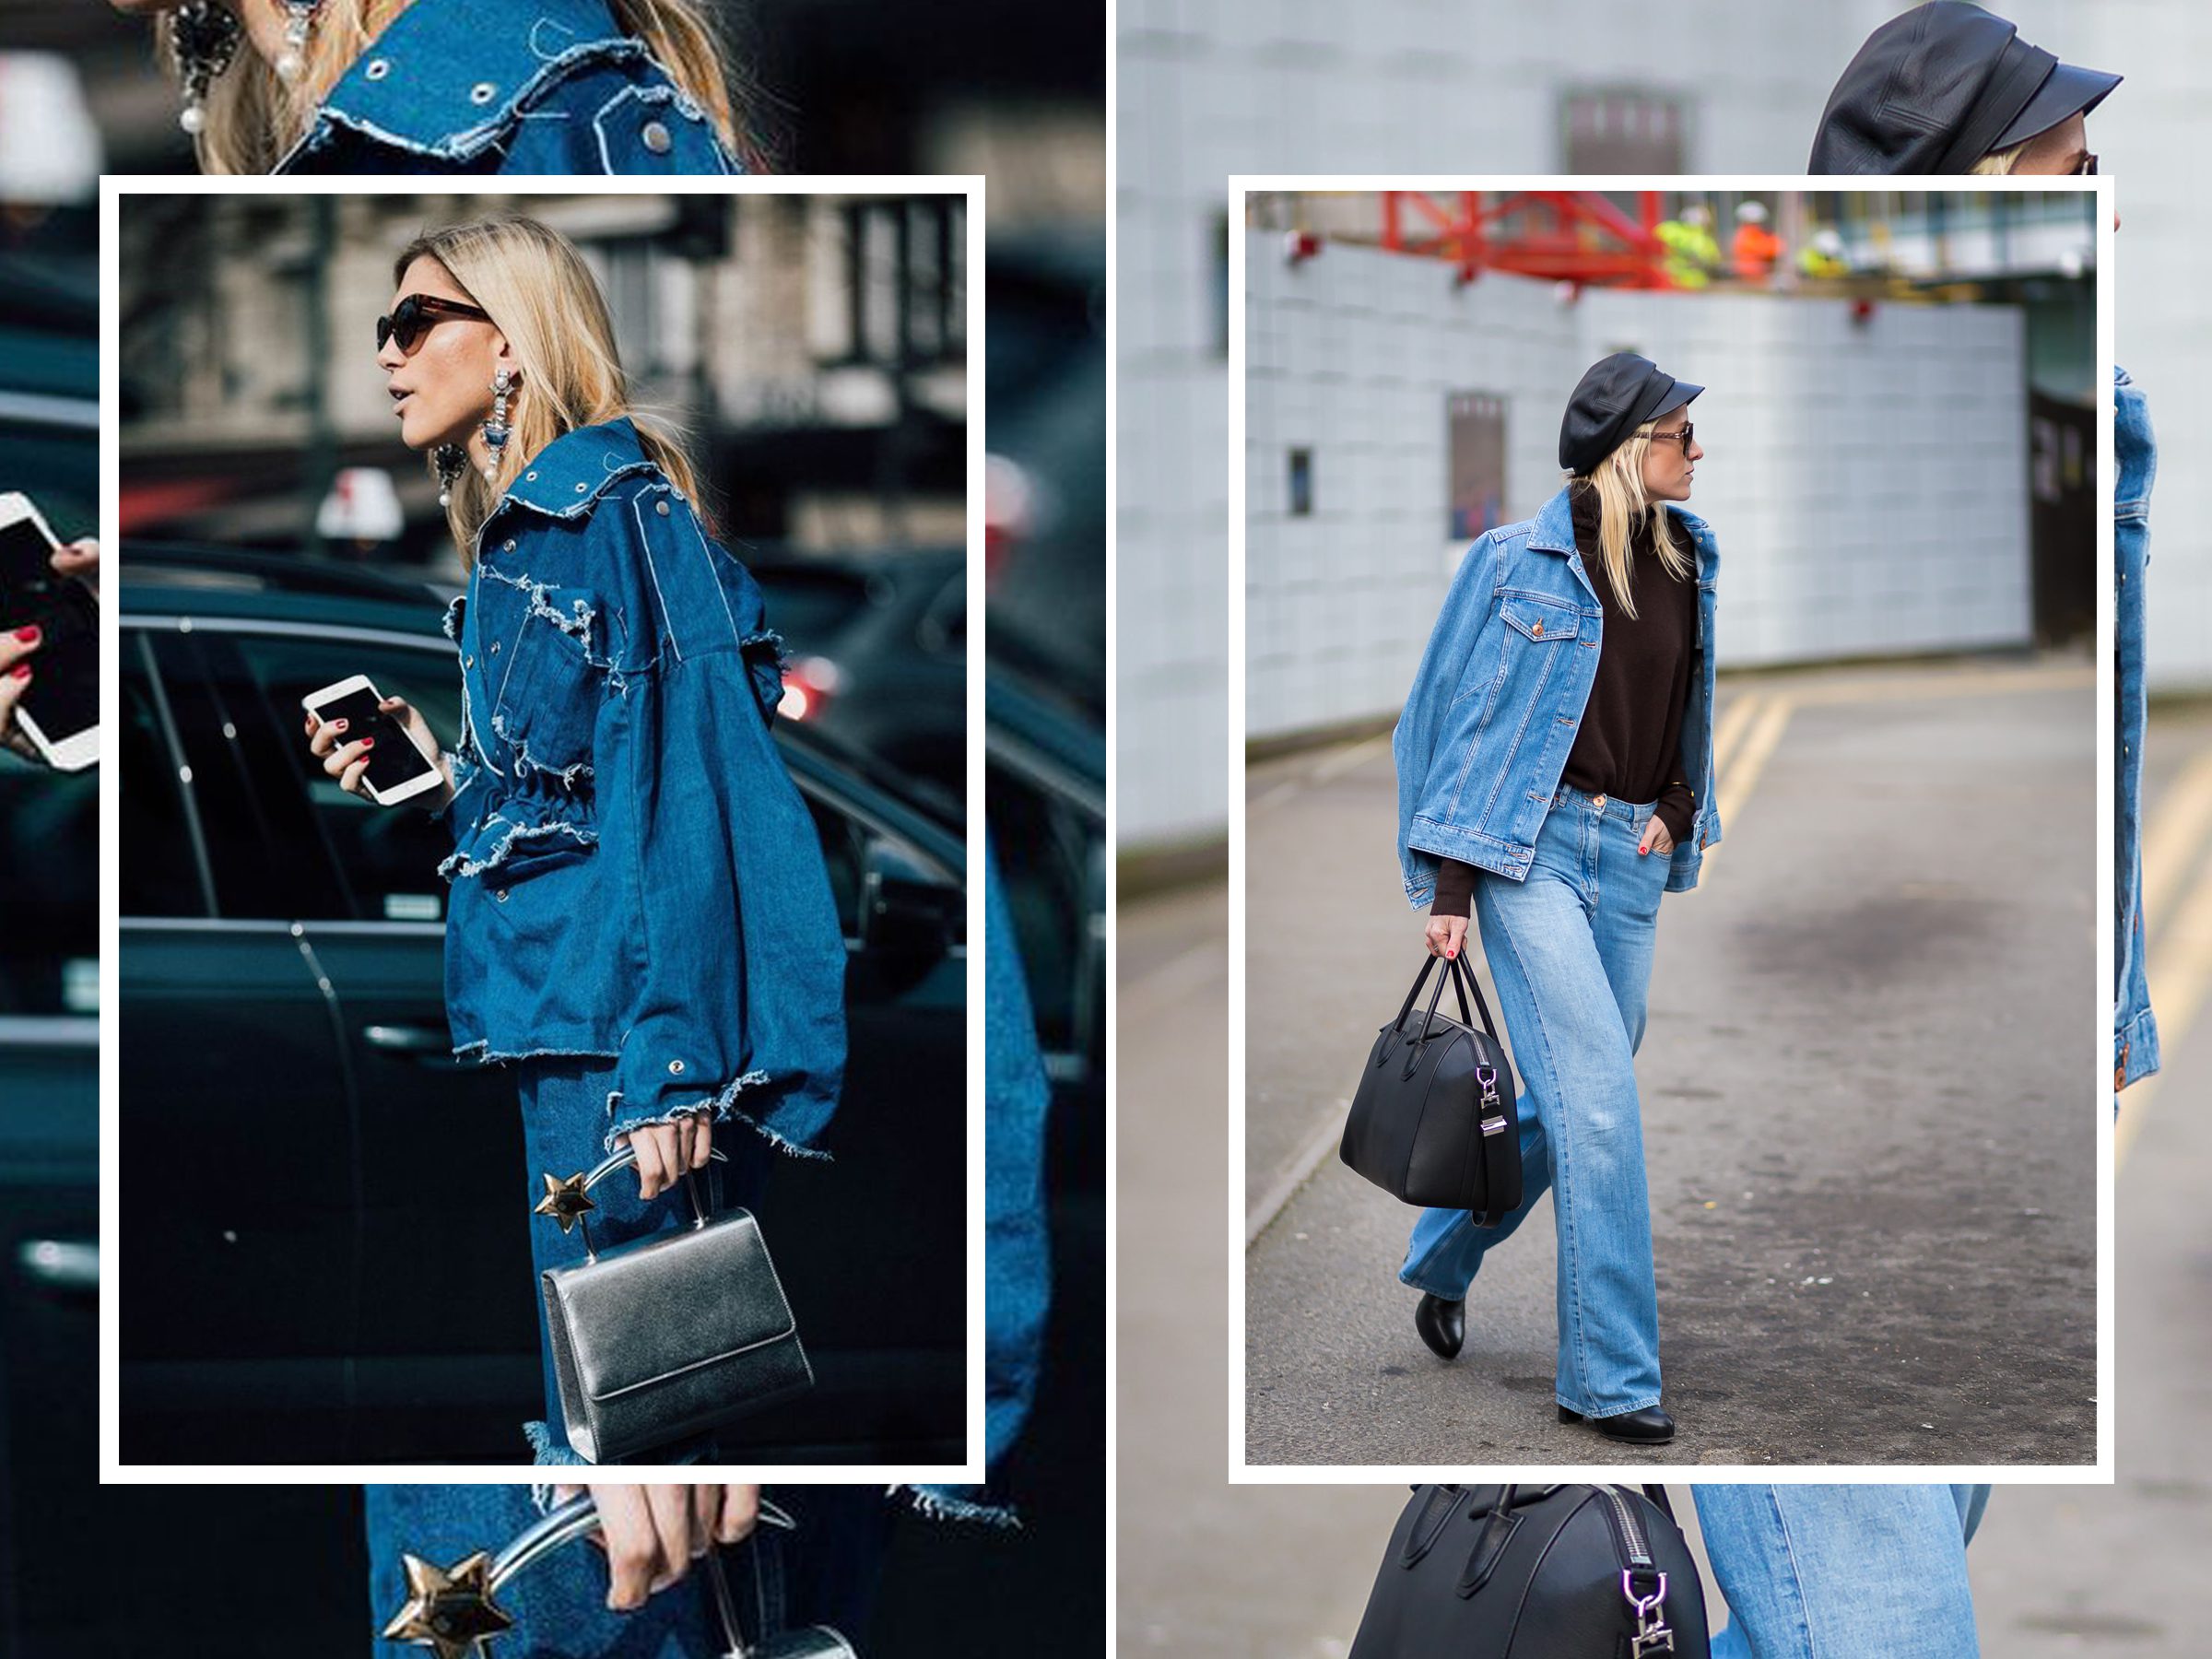 The Denim Jacket: Have you Got Yours"